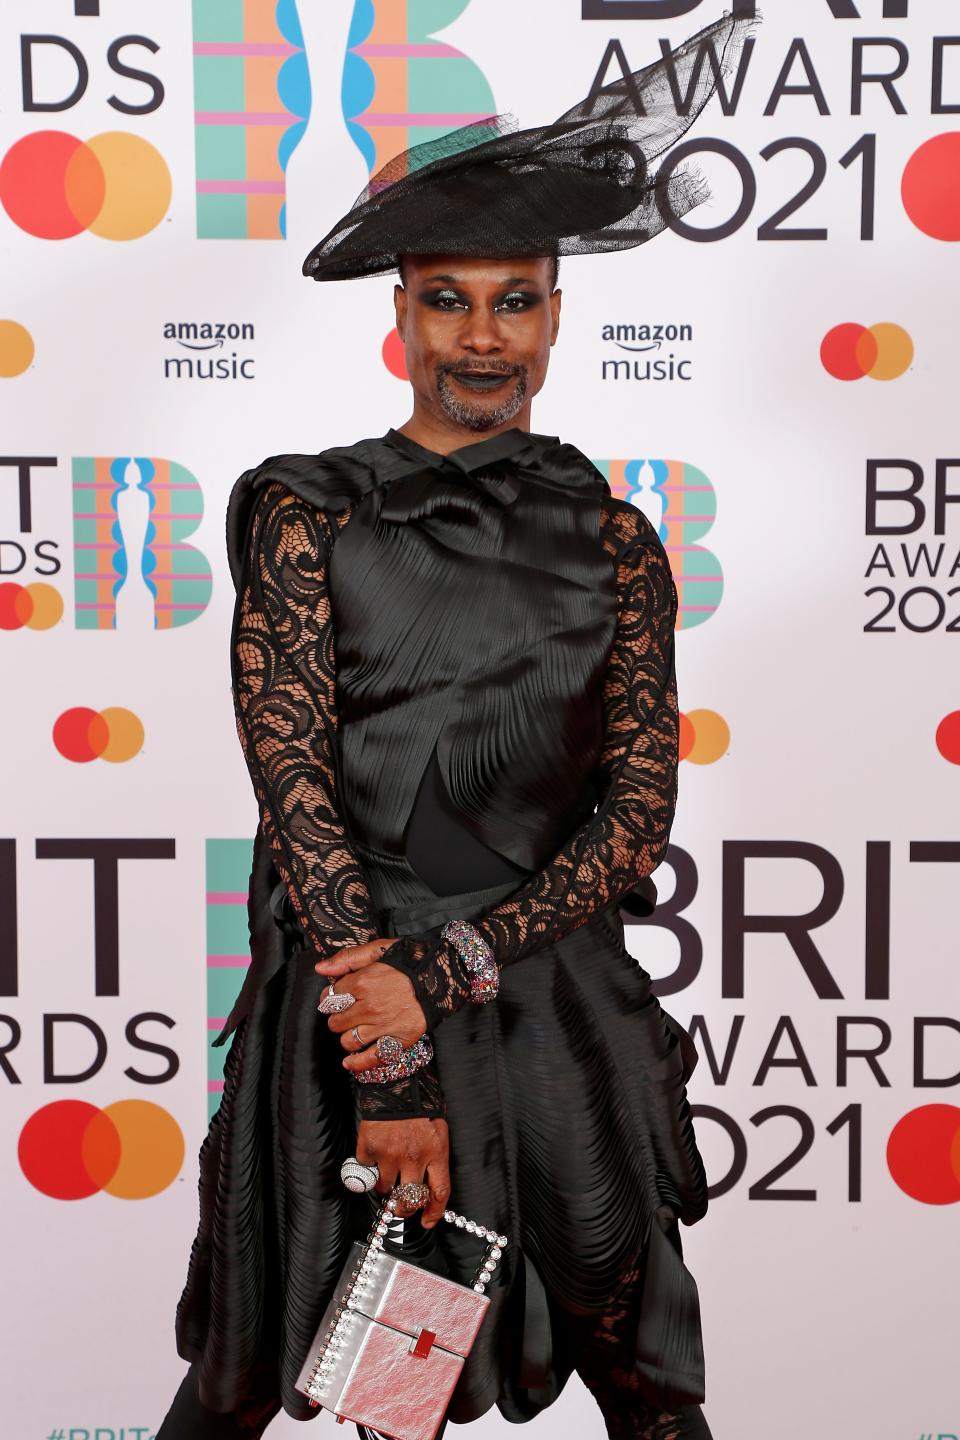 Billy Porter at the Brit Awards in 2021 wearing all black